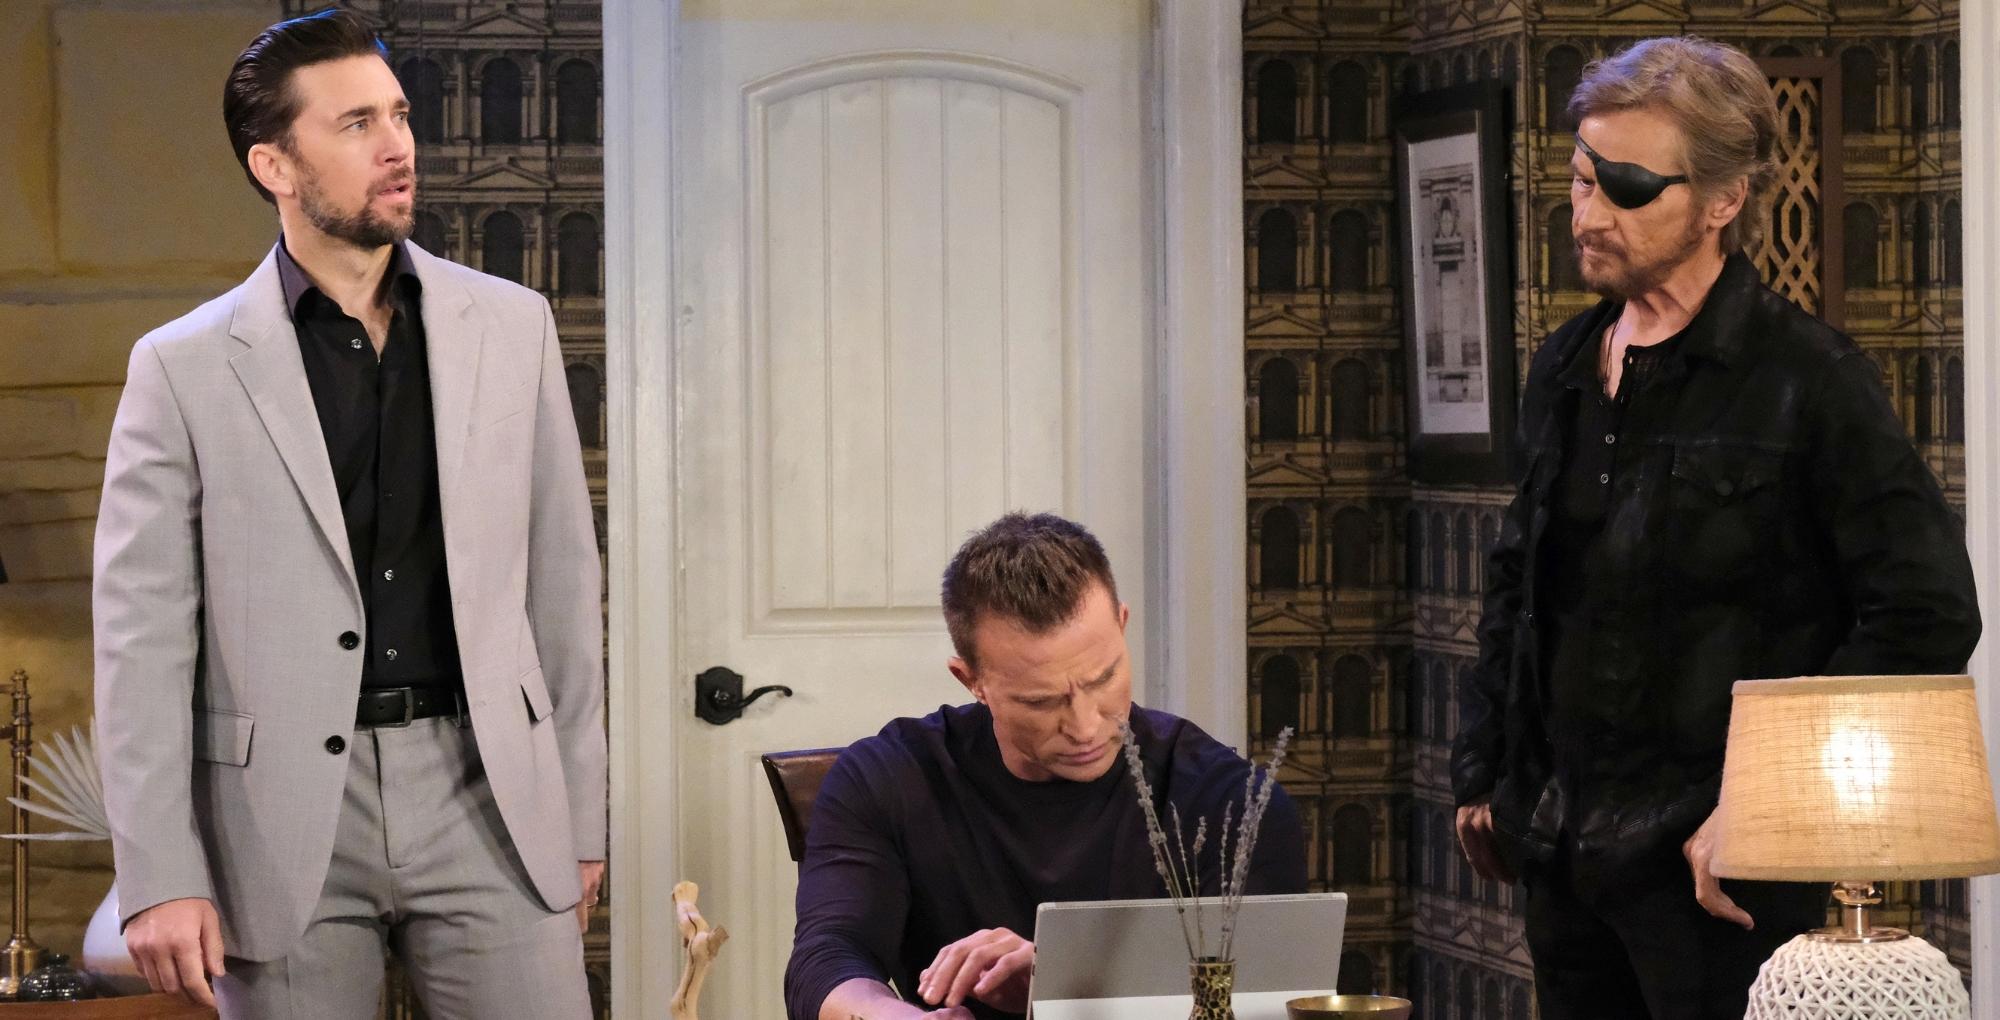 days of our lives spoilers for may 12, 2023, have chad, harris, and steve making a plan.